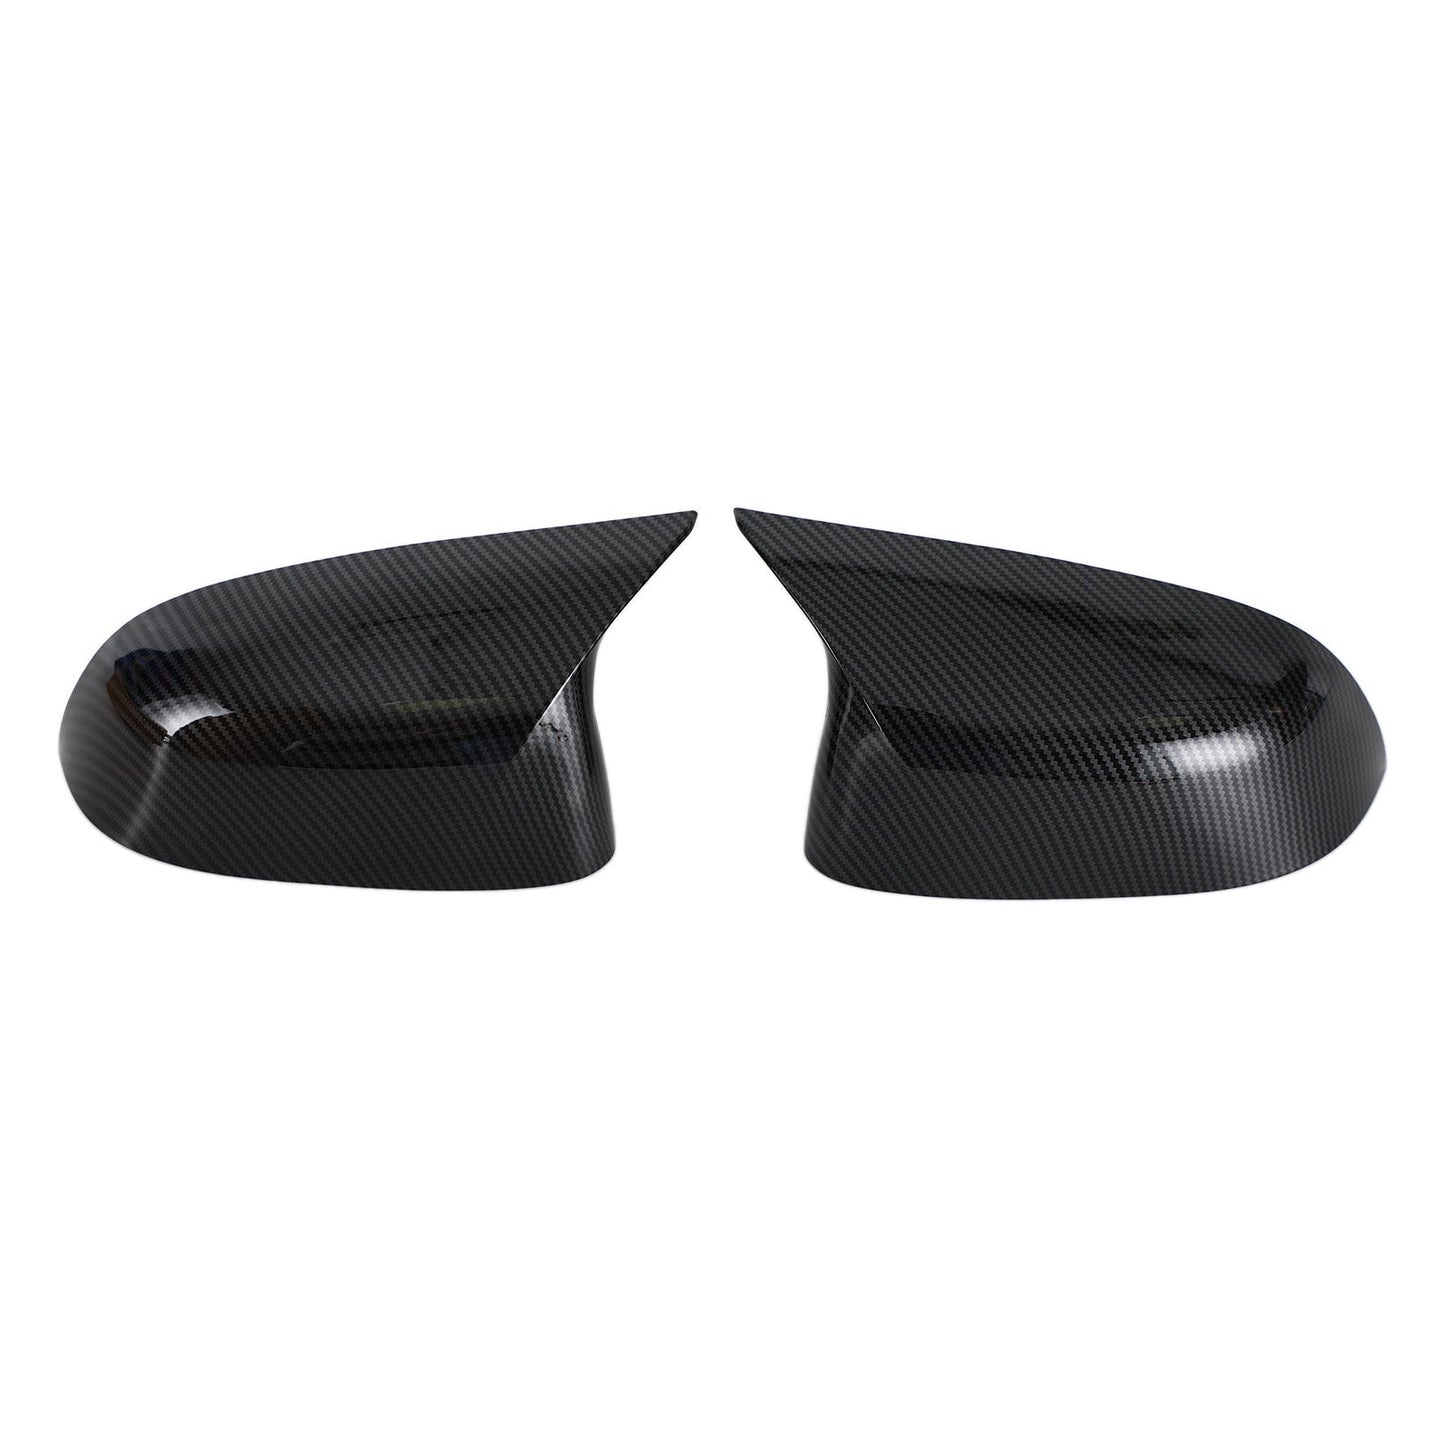 2x Carbon Rear View Side Mirror Cover Caps For BMW X3 X4 X5 X6 G01 G02 G05 G06